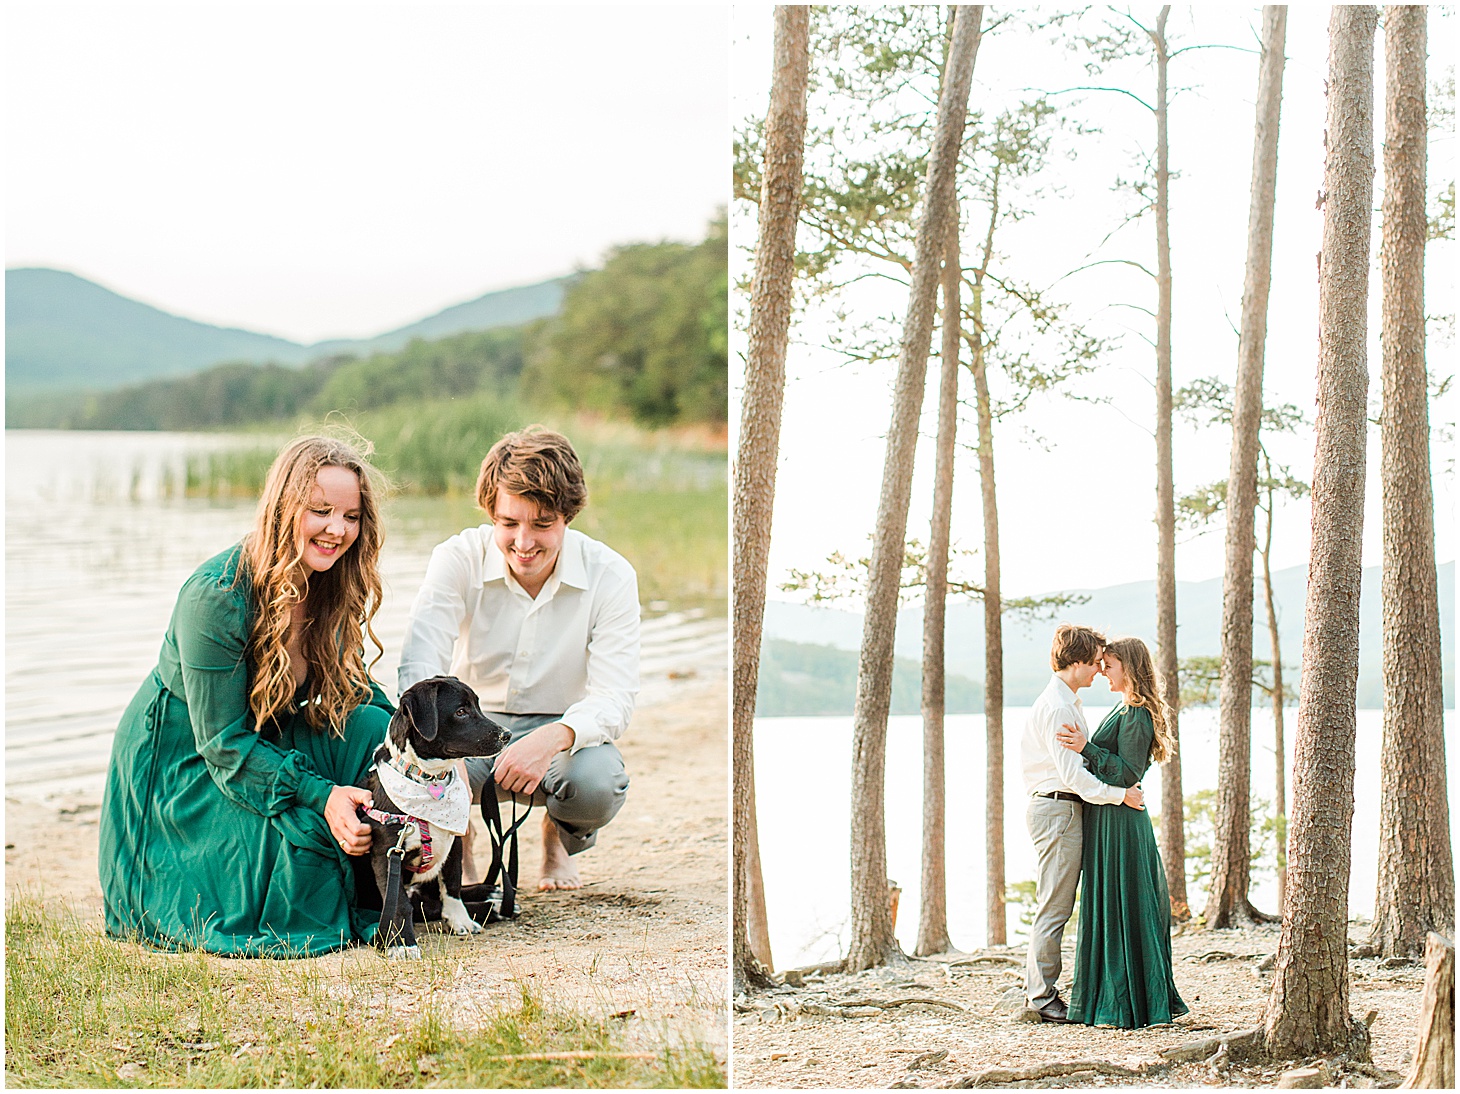 carvinscoveengagementsession_roanokeengagementsession_carvinscove_virginiawedding_virginiaweddingphotographer_vaweddingphotographer_photo_0063.jpg